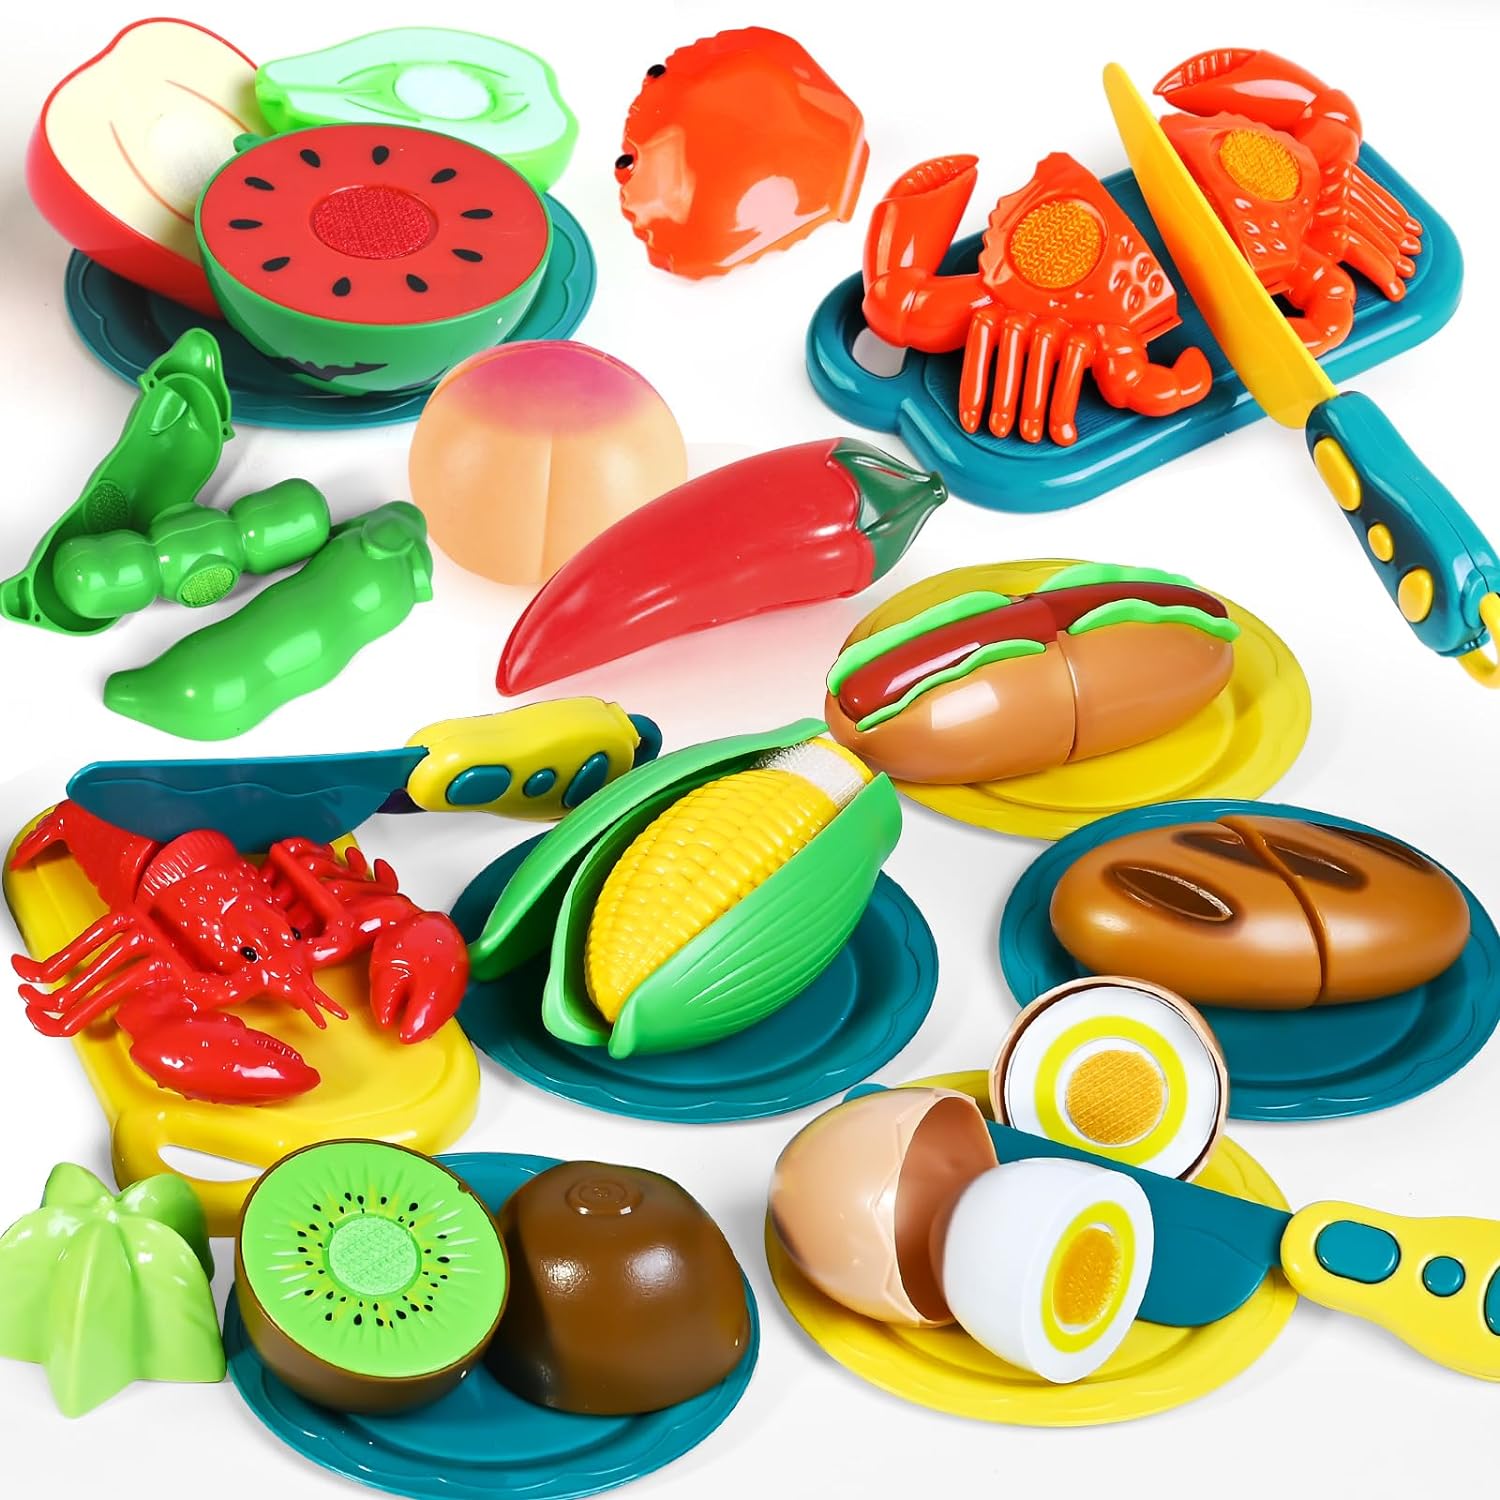 100 PCS Cutting Play Food Toy for Kids Kitchen, Pretend Food Toys for Toddlers, Play Kitchen Toys Accessories with 2 Baskets, Fake Food/Fruit/Vegetable, Birthday Gifts for 2 3 4 5 Years Old Boys Girls